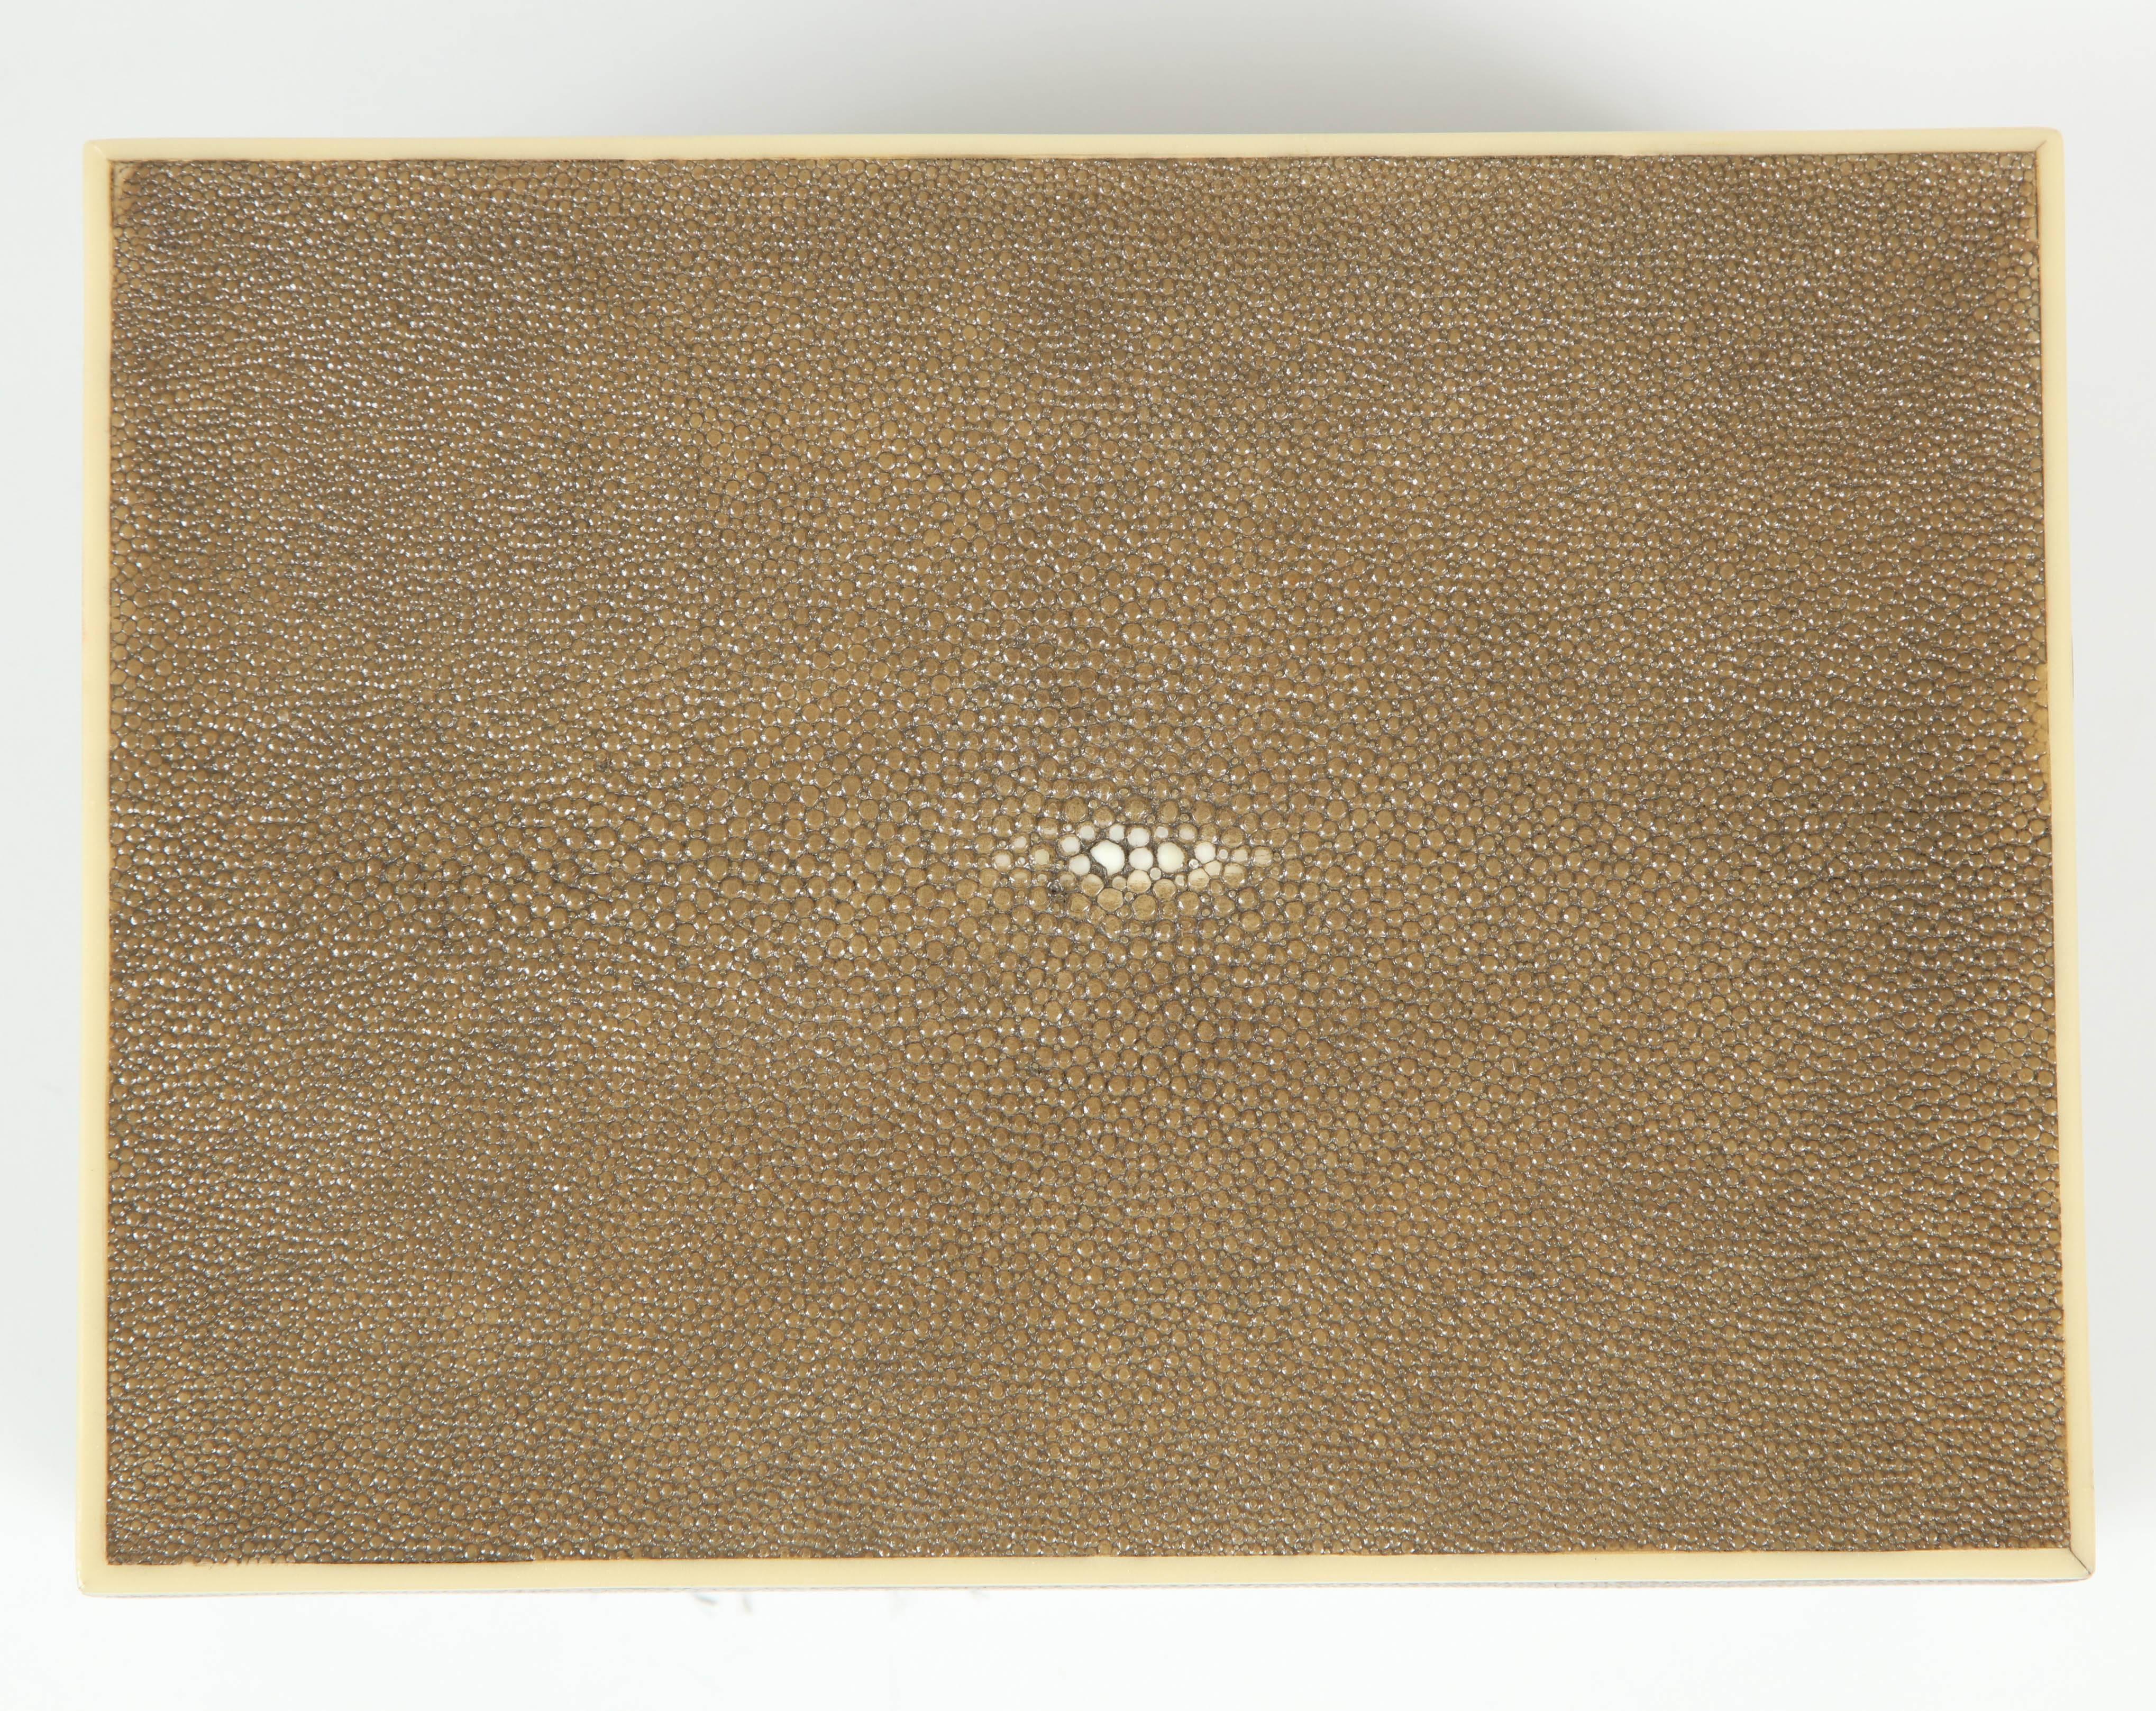 Philippine Shagreen Box with Decorative Inlay, Coco Color, 